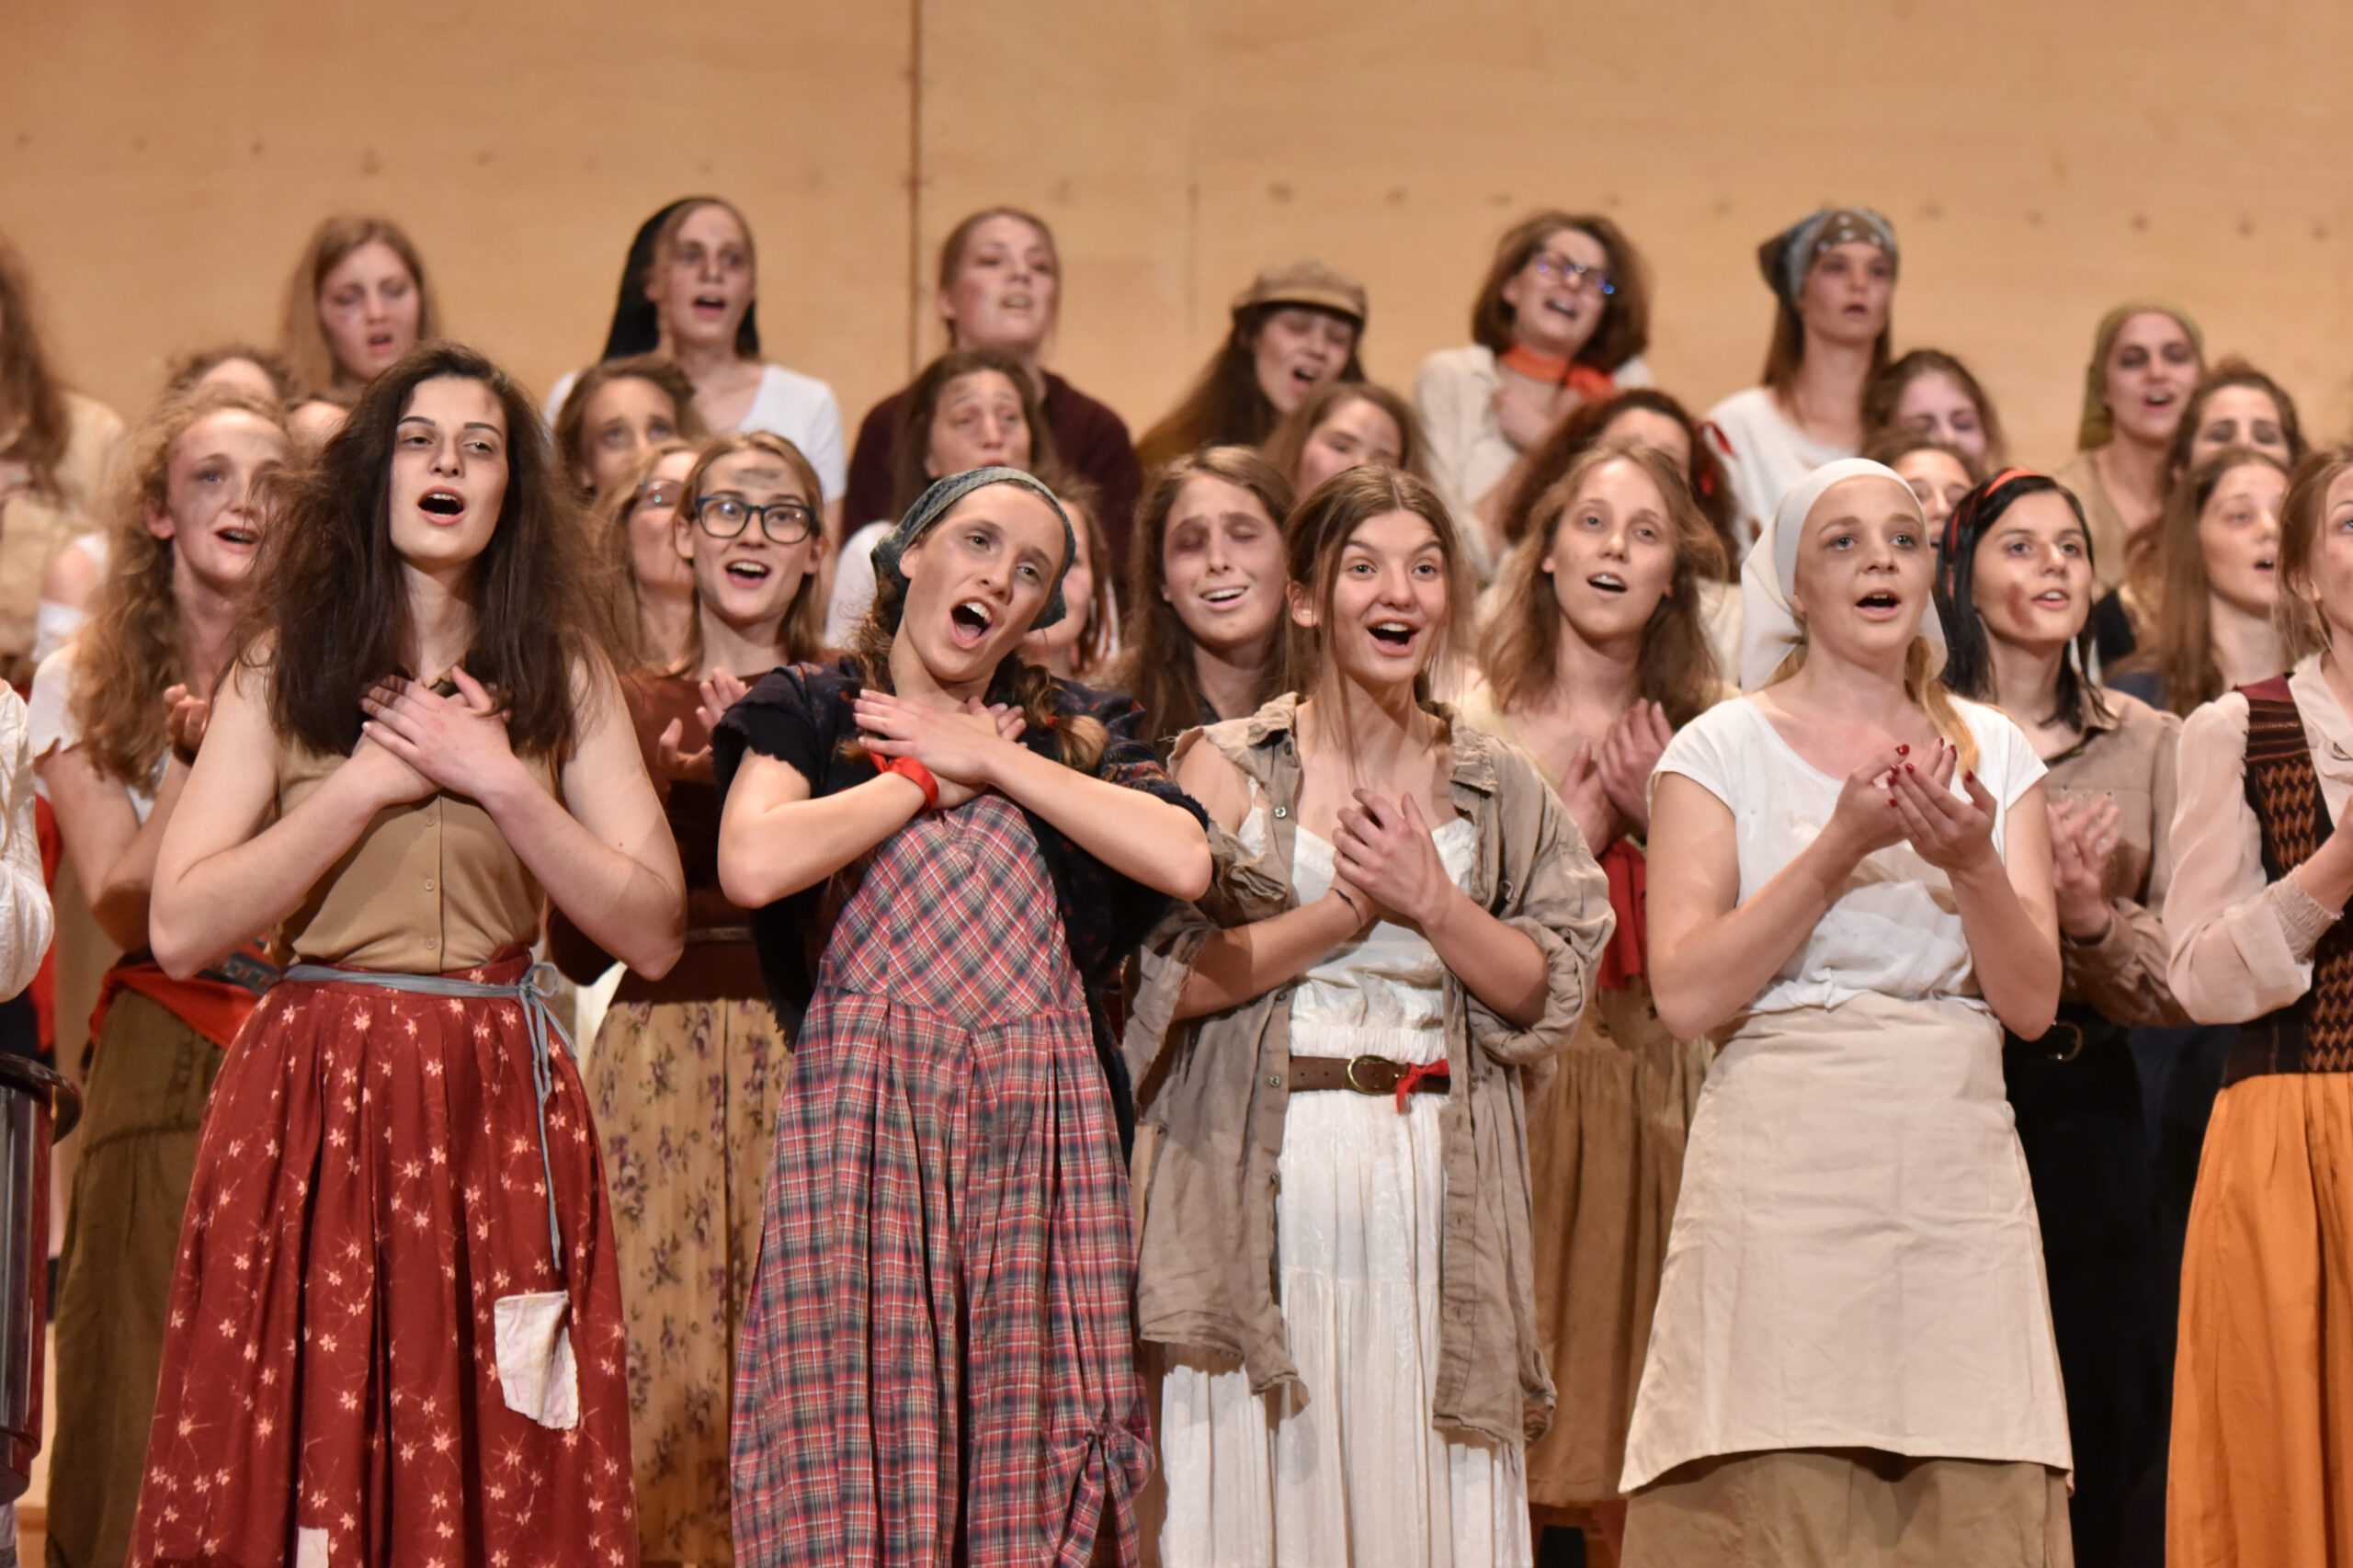 Janez Eržen, Slovenia: Les Misérables, 2019, (Re)Mixed Choir of the Diocesan Classical Gymnasium, Slovenia  - A scene from the musical Les Misérables. A fine example of costume design that upgrades the message of the performance.